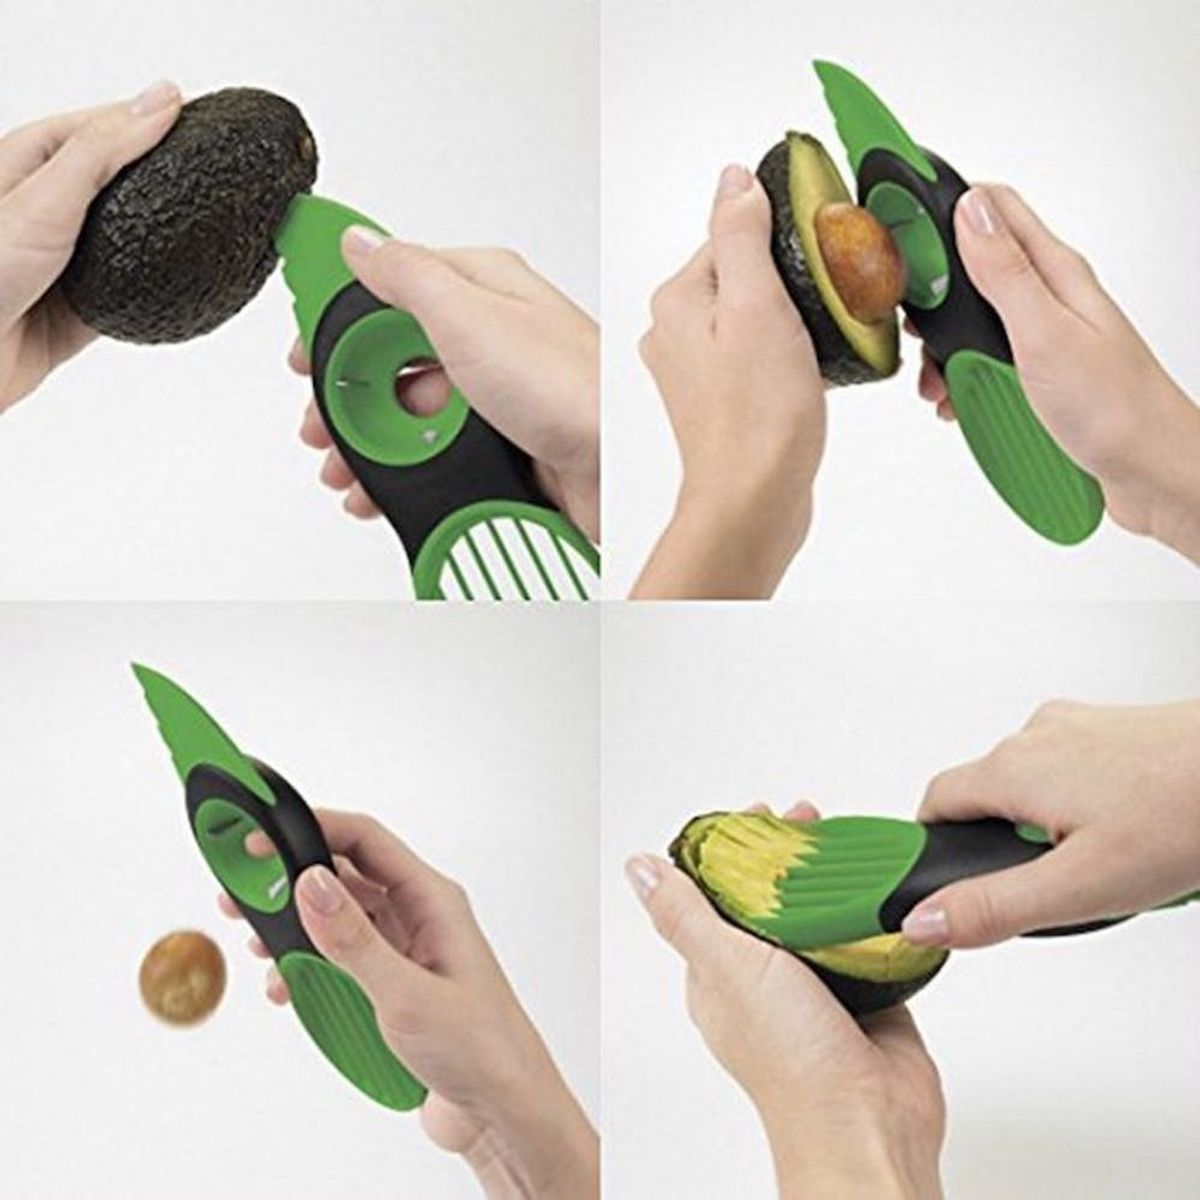 An Amazing Avocado Tool and 14 Other Tempting Deals on Amazon Right Now